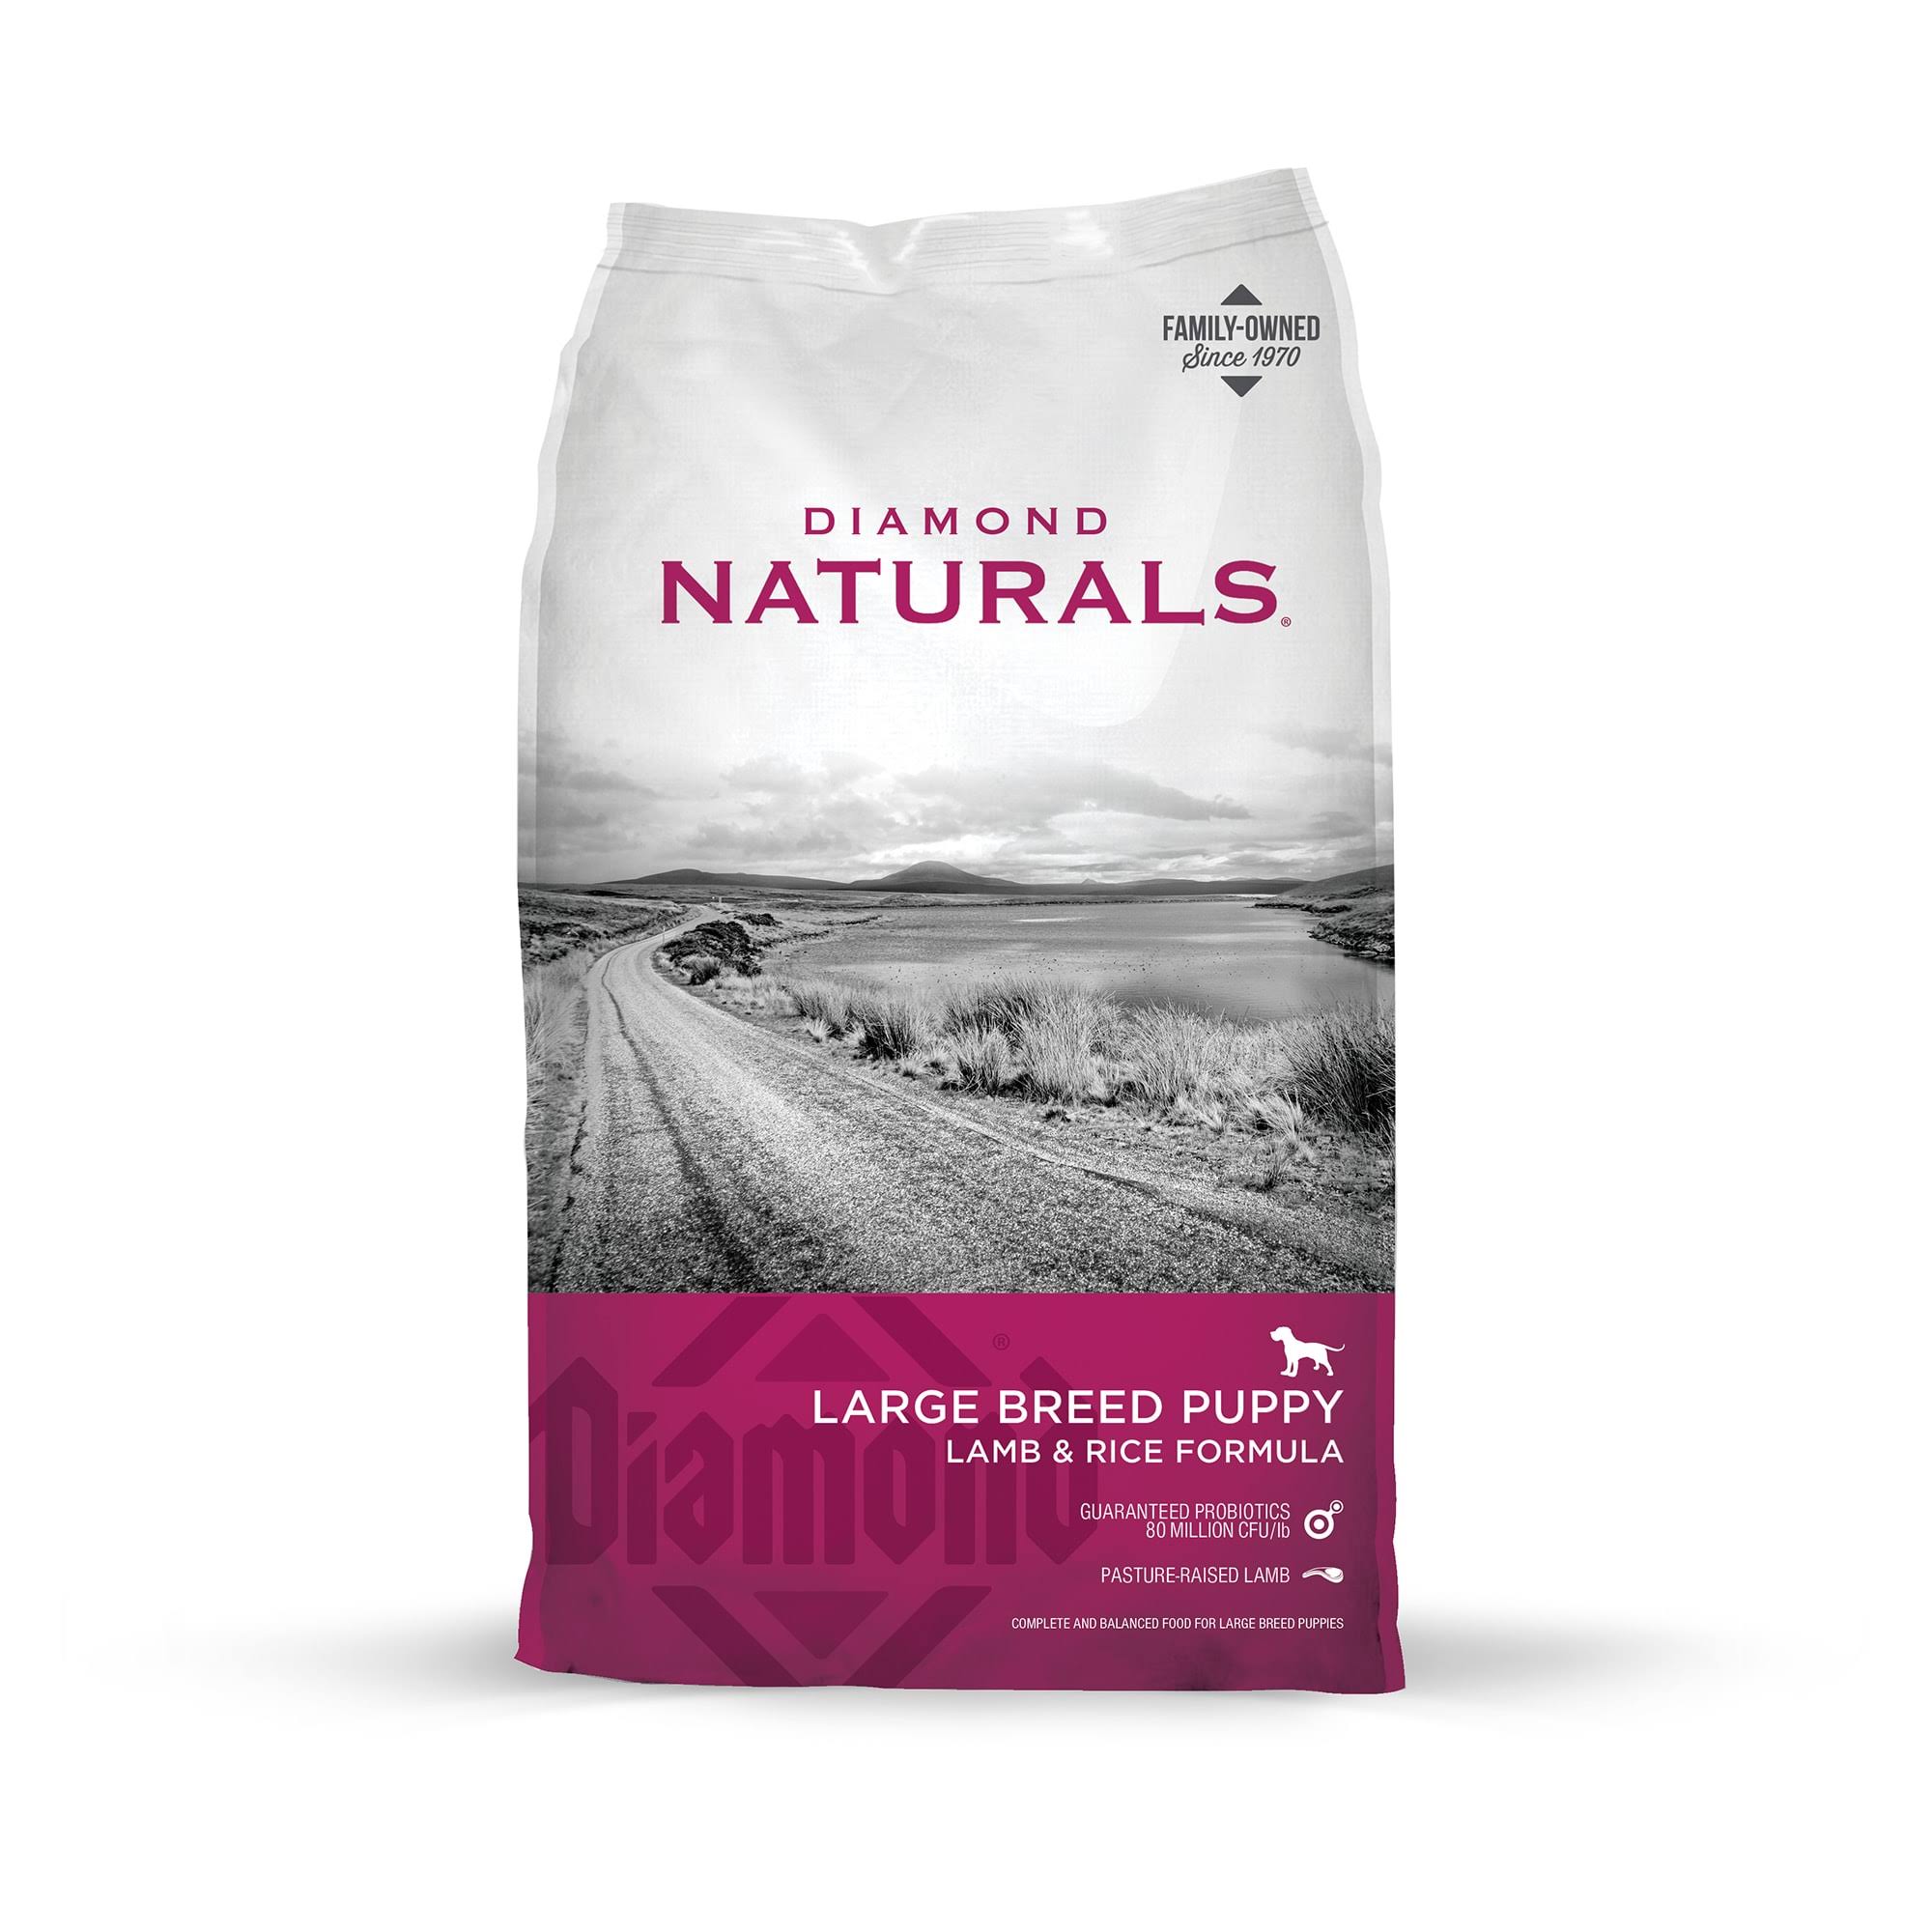 Diamond Naturals Food for Puppy - Large Breed, Dry, Lamb and Rice Formula, 6lbs